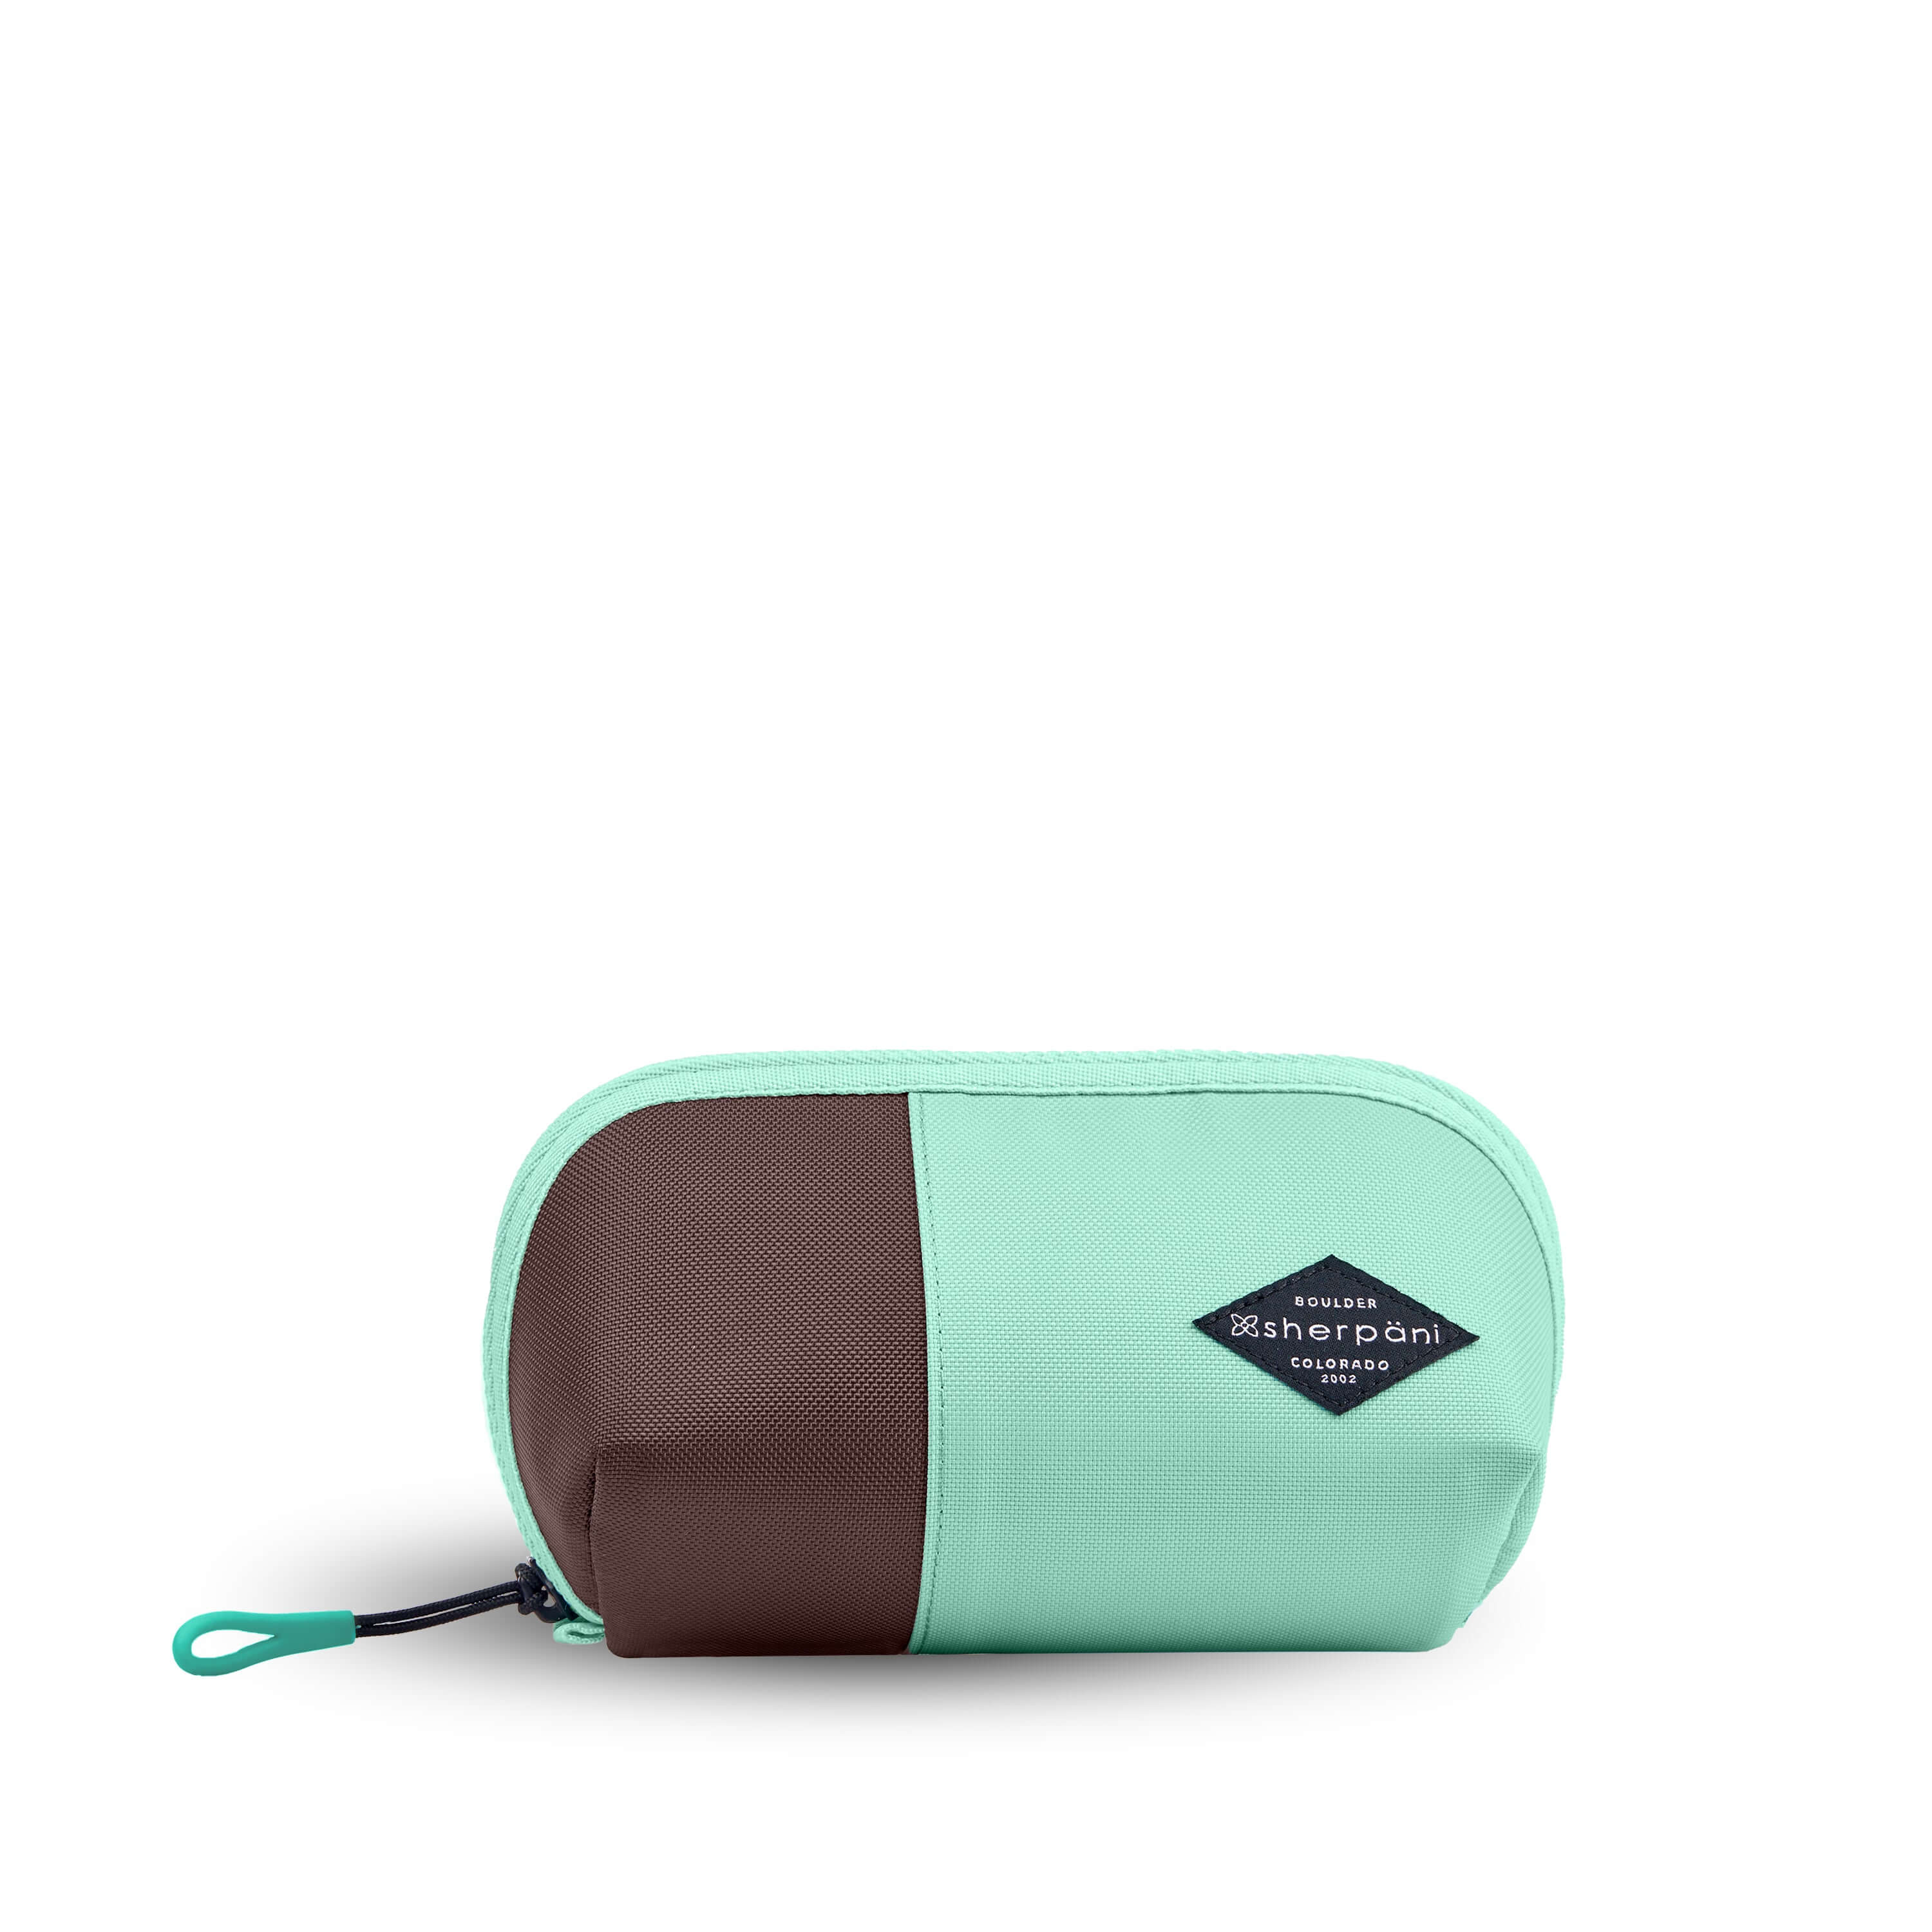 Flat front view of Sherpani travel accessory, the Harmony in Seagreen. The pouch is two-toned in light green and brown. It has an easy-pull zipper that is accented in light green.